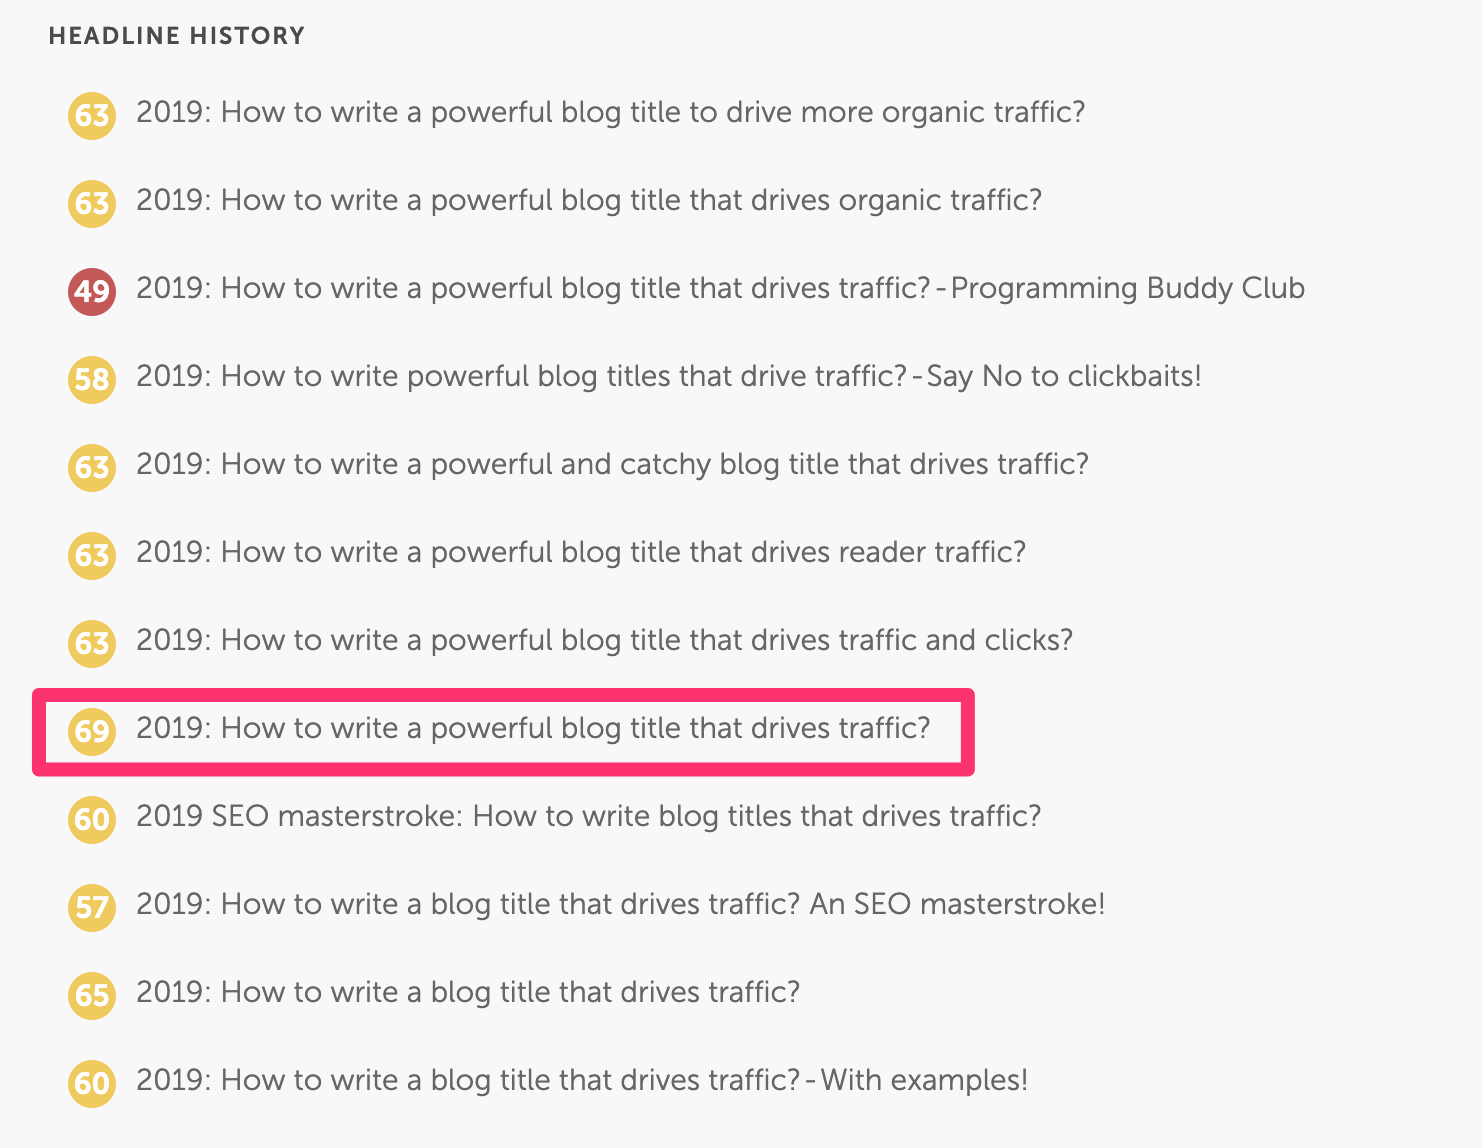 8: How to write a powerful blog title that drives traffic?  by